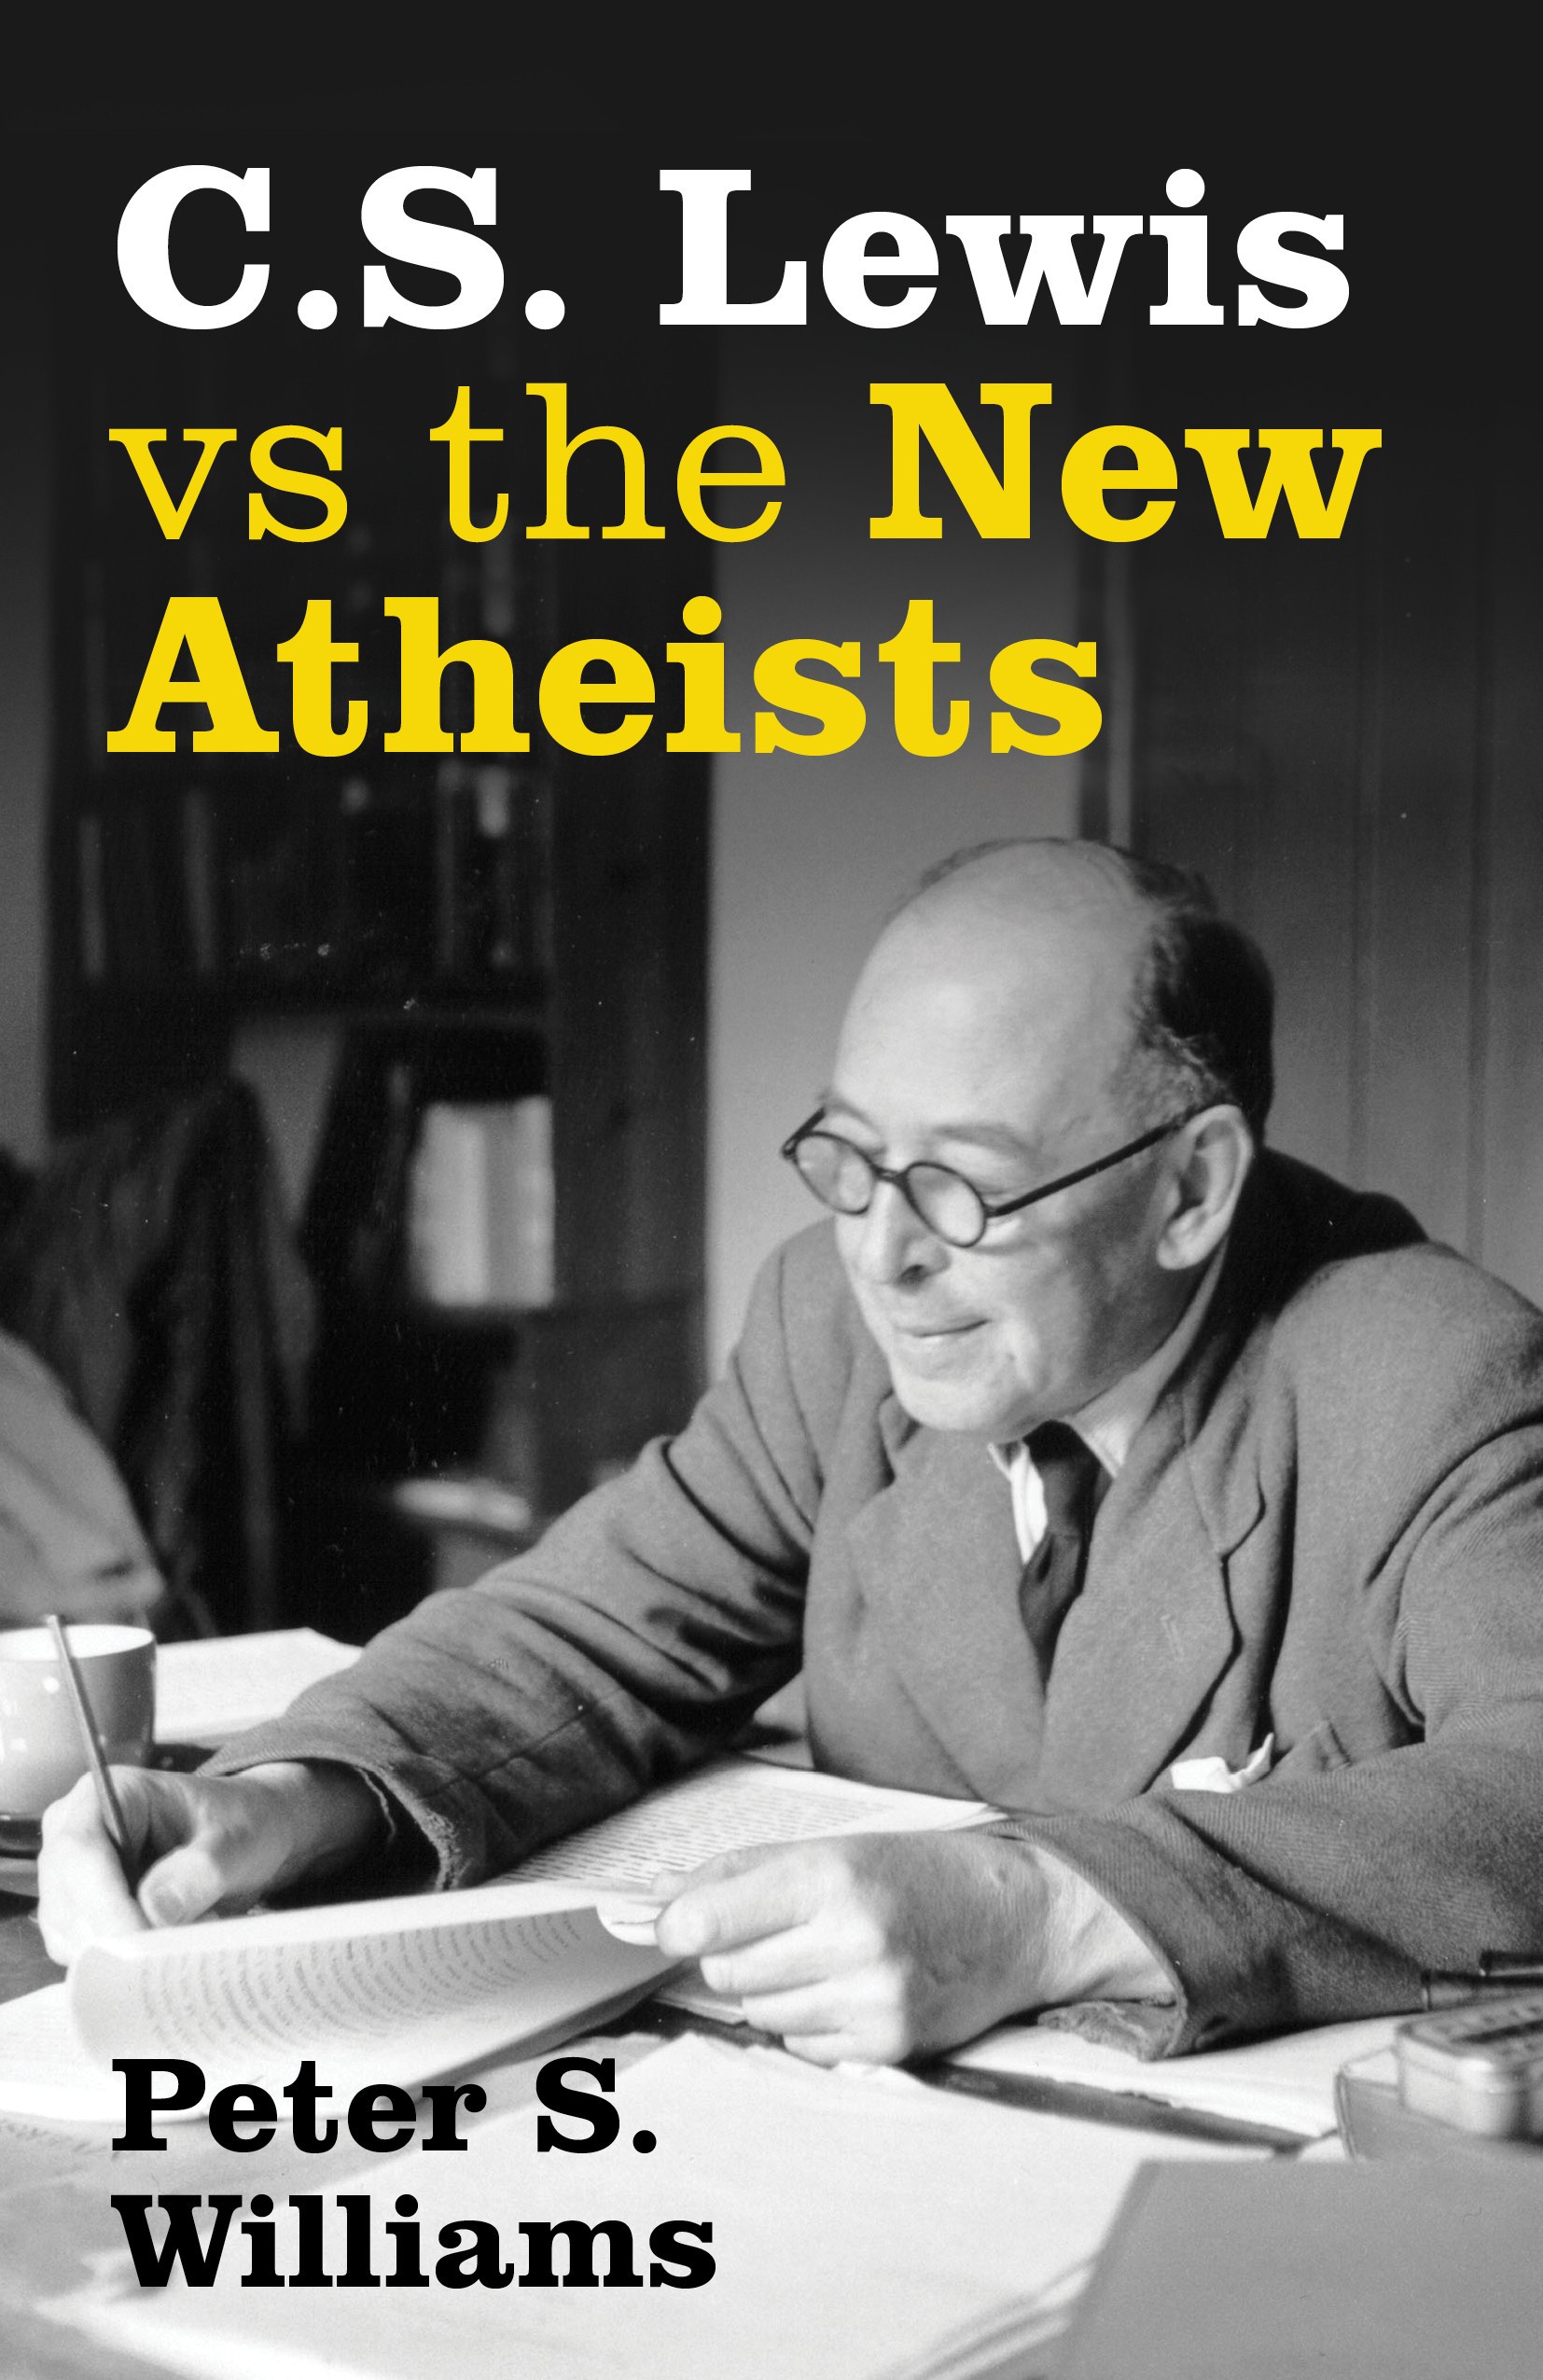 C.S. Lewis vs the New Atheists #4 - A Desire for Divinity?